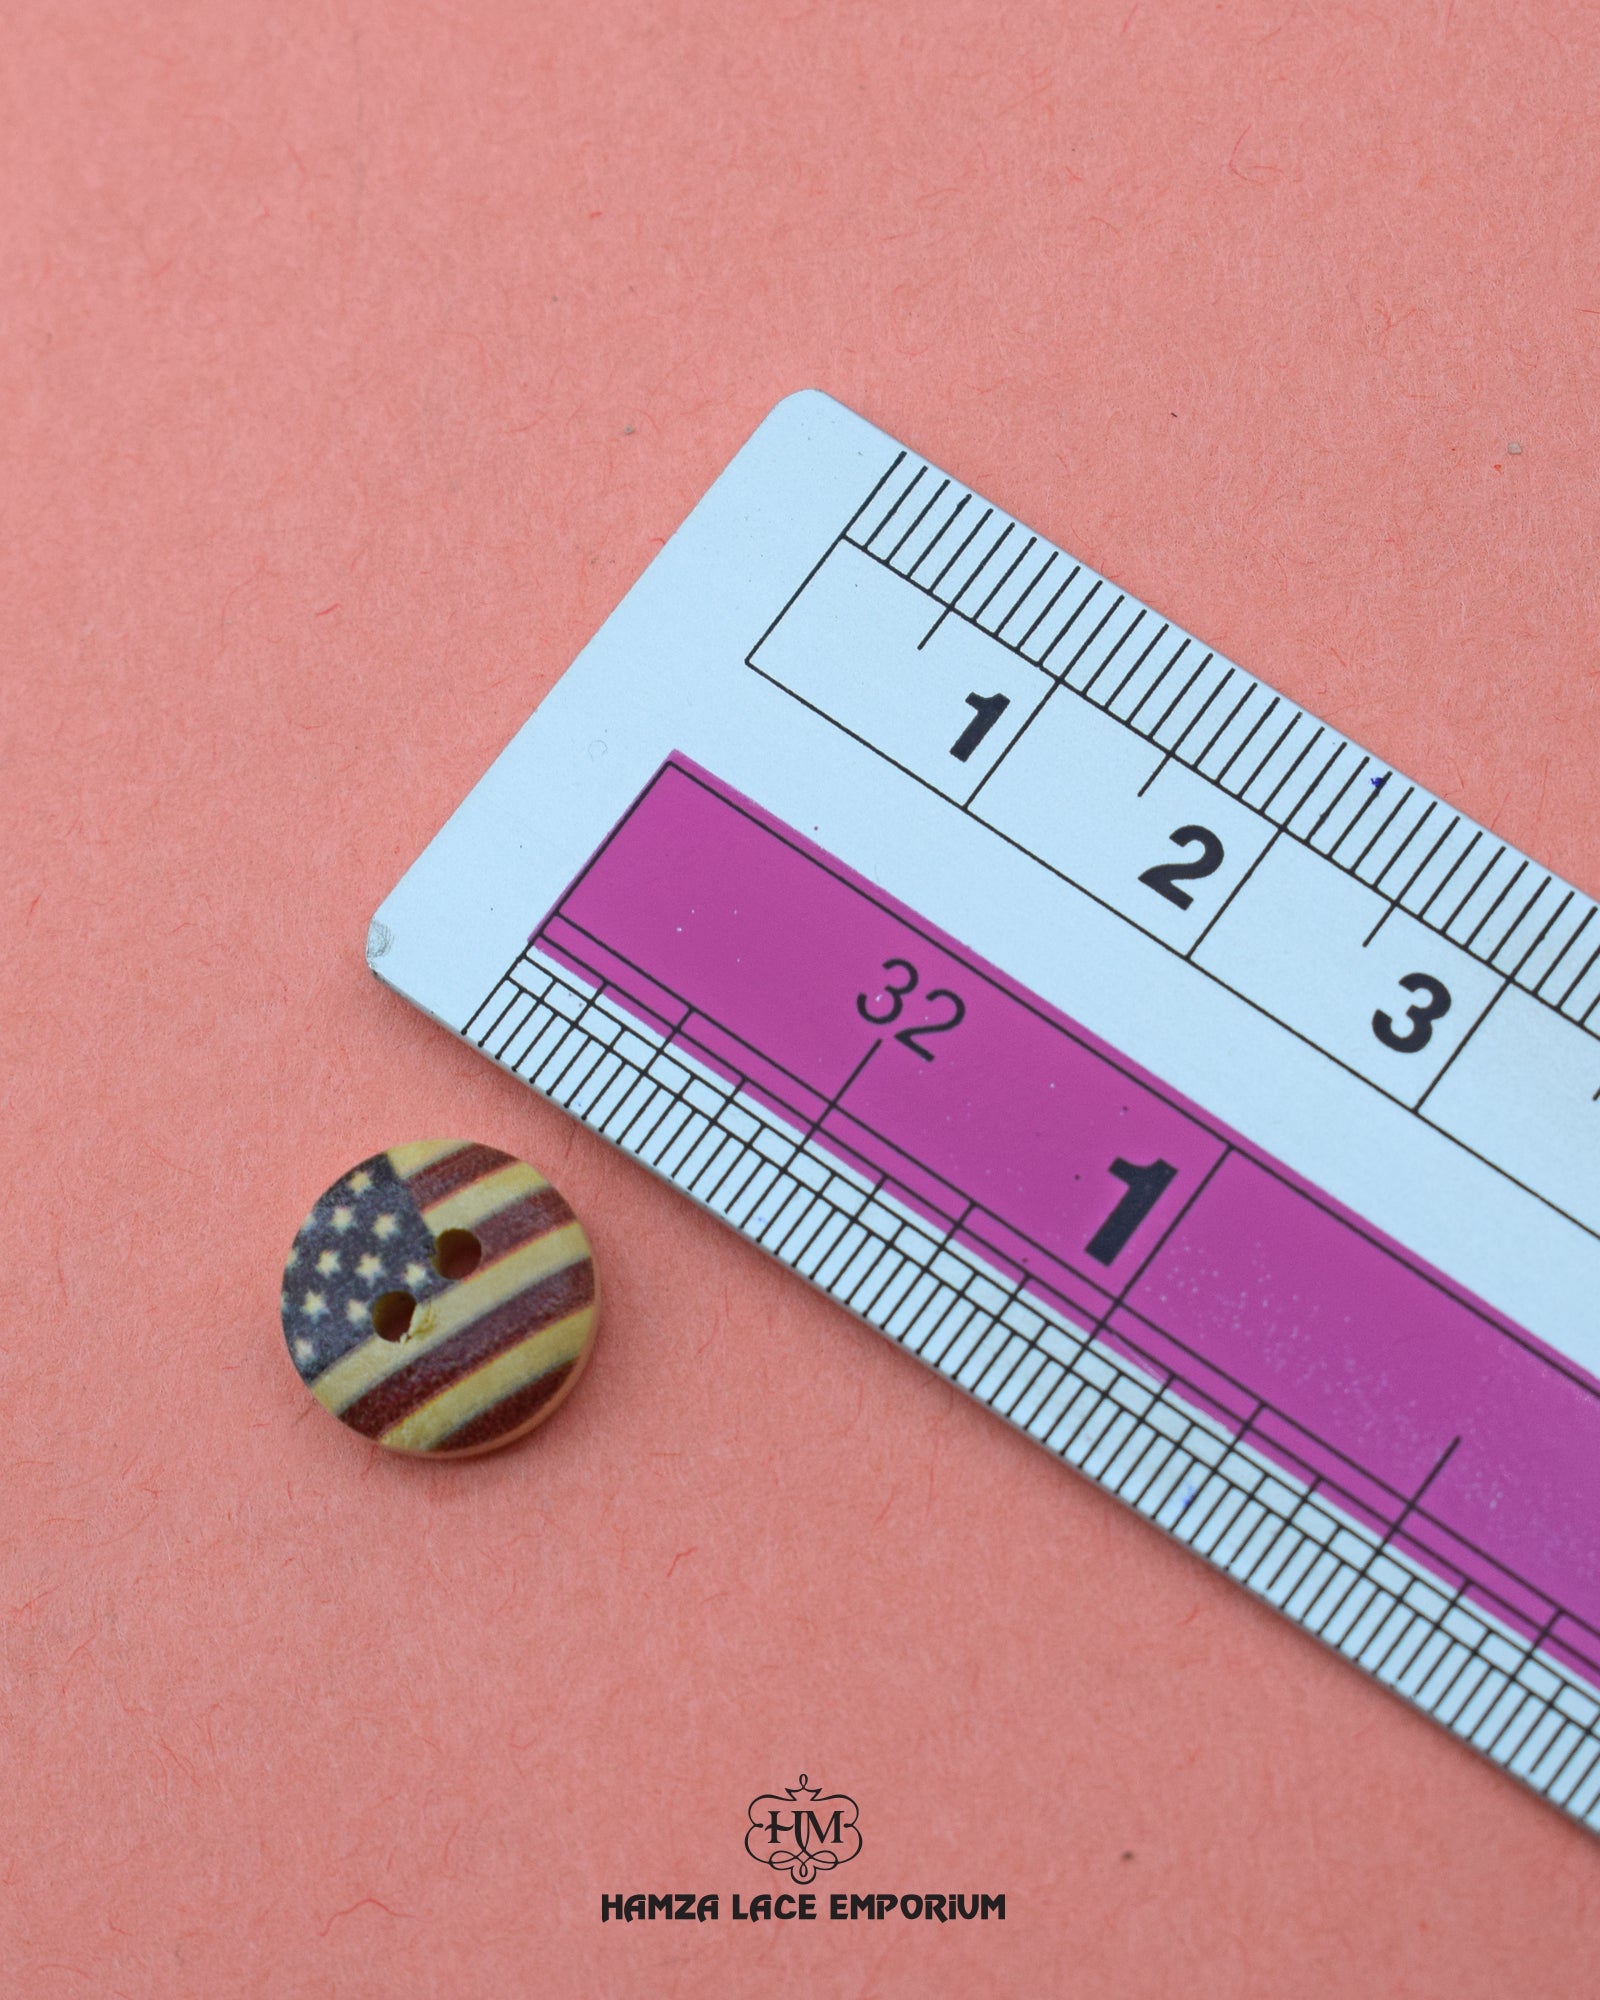 Size of the 'Wood Button WB42' is shown with a ruler